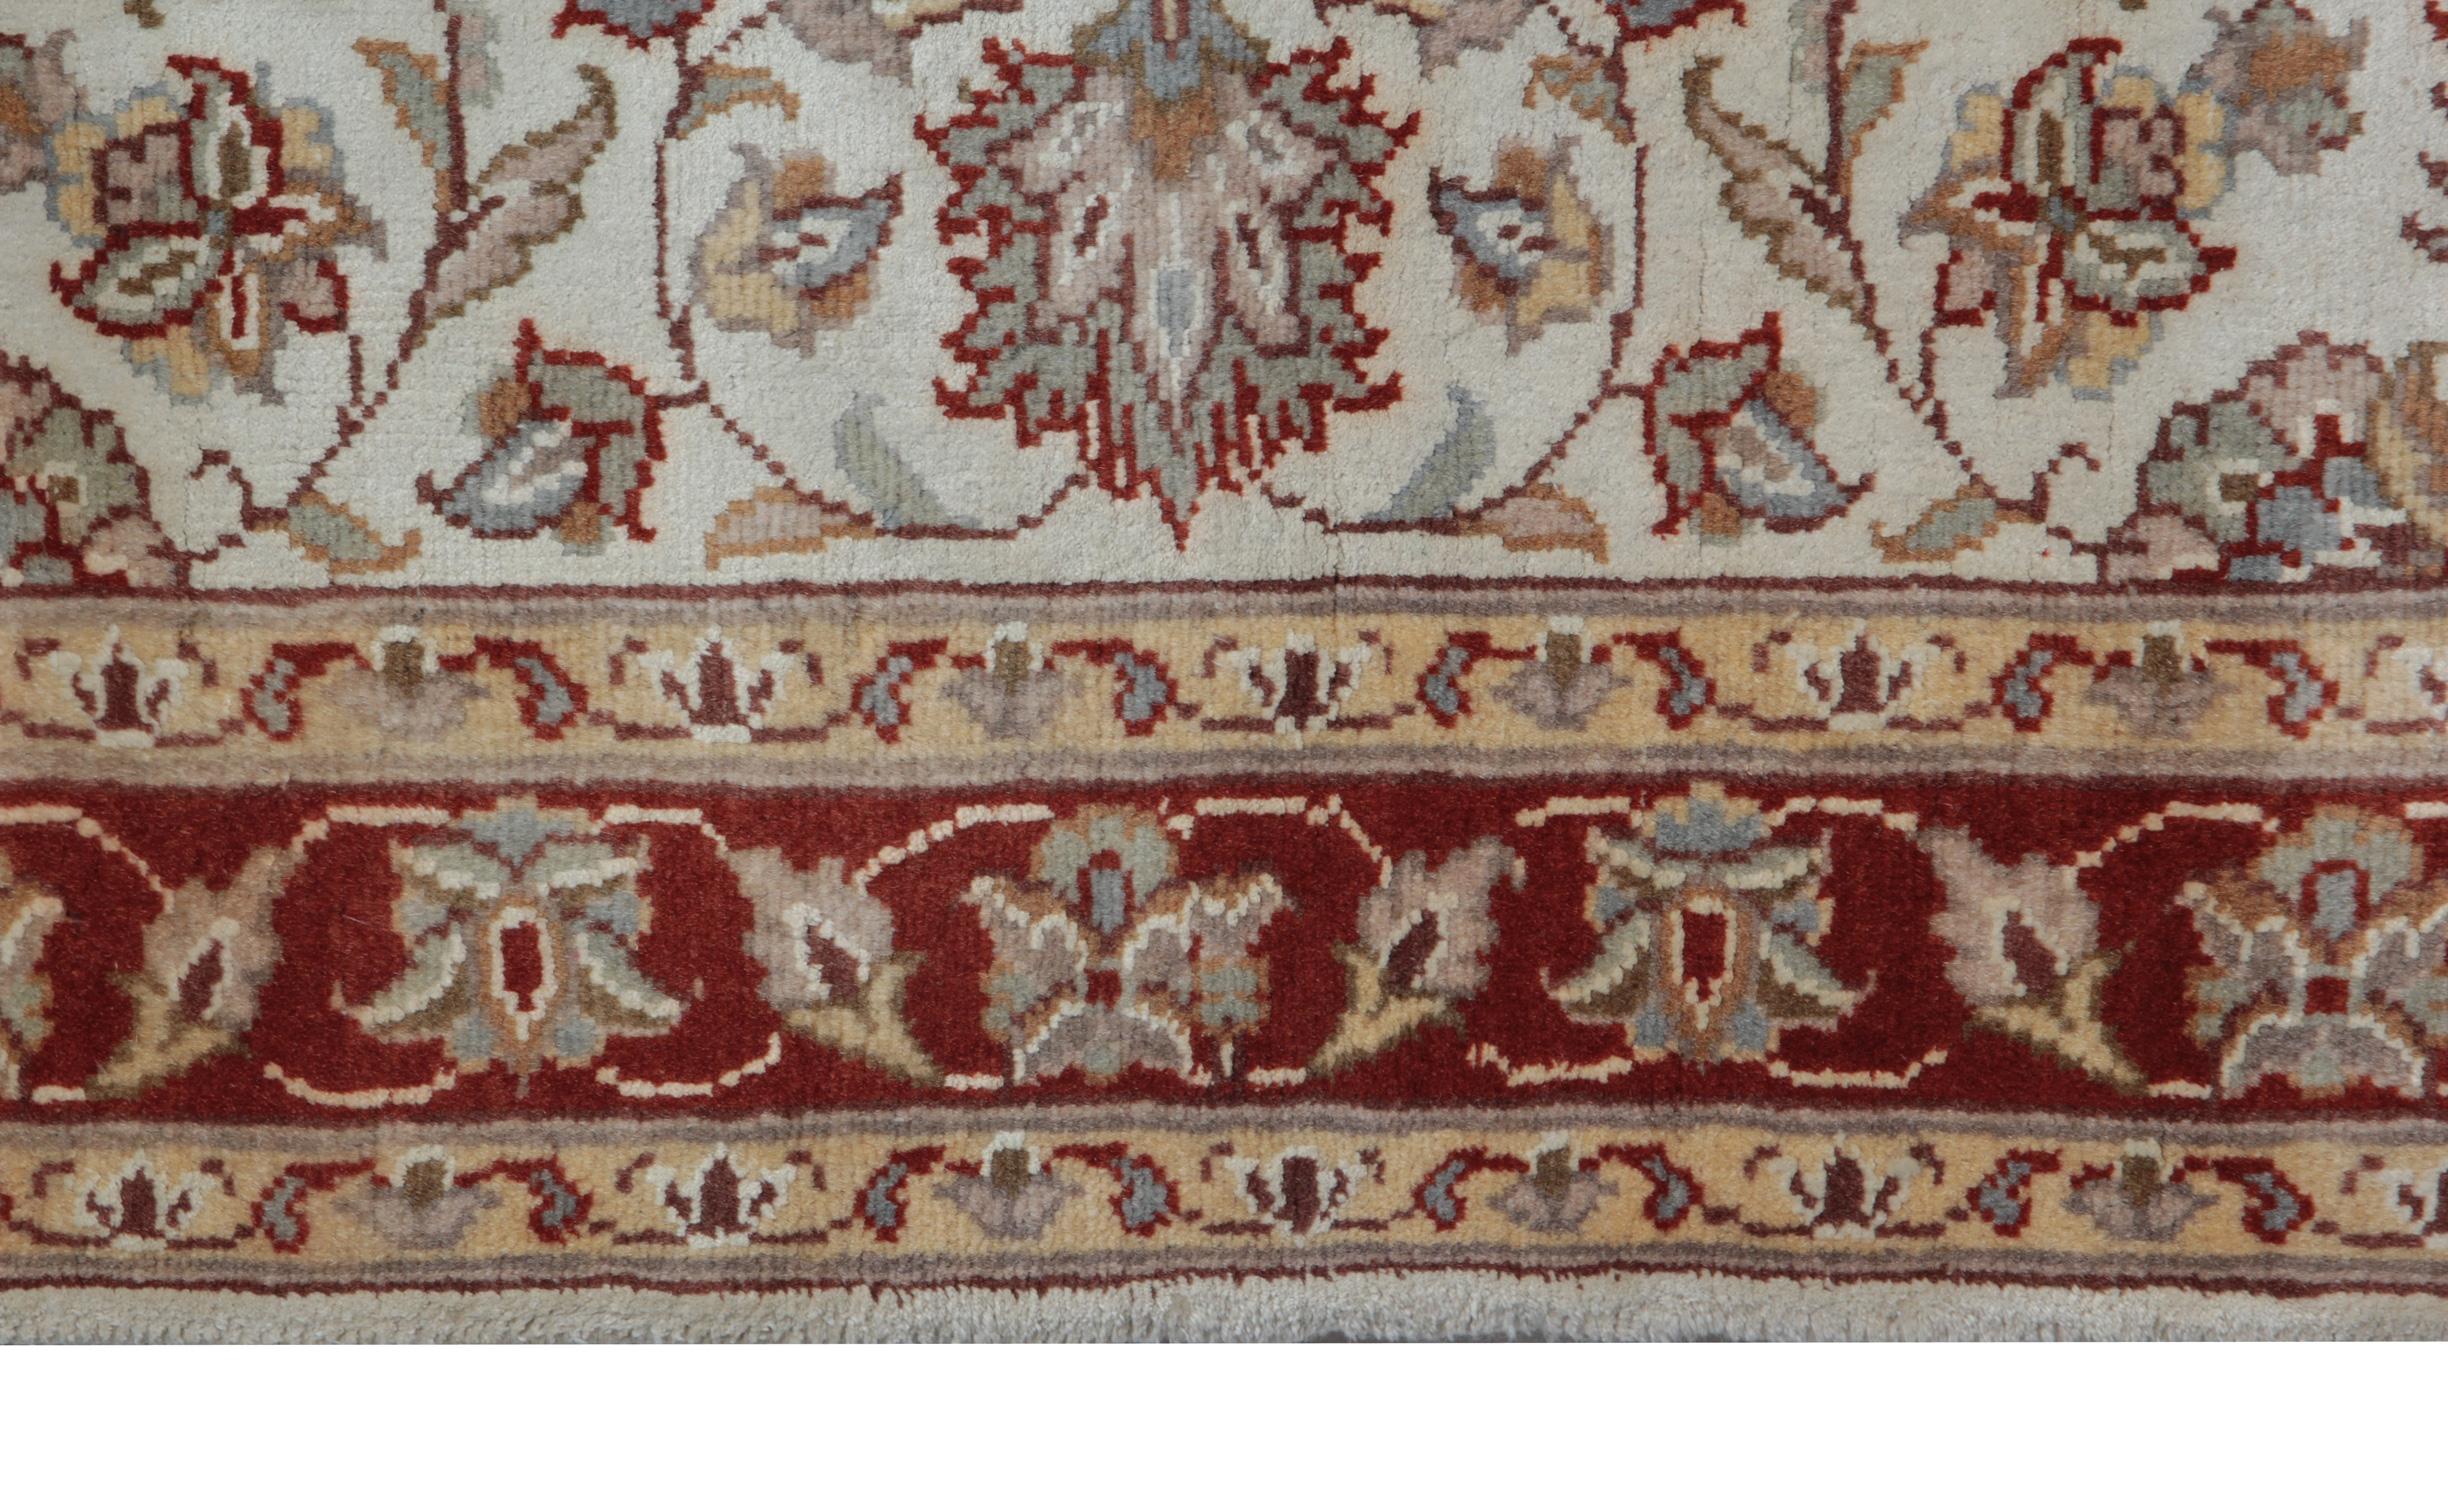 Hand-Crafted Traditional Area Rugs, Indian Carpet Cream Rug, Floor Rugs for Sale Red Border